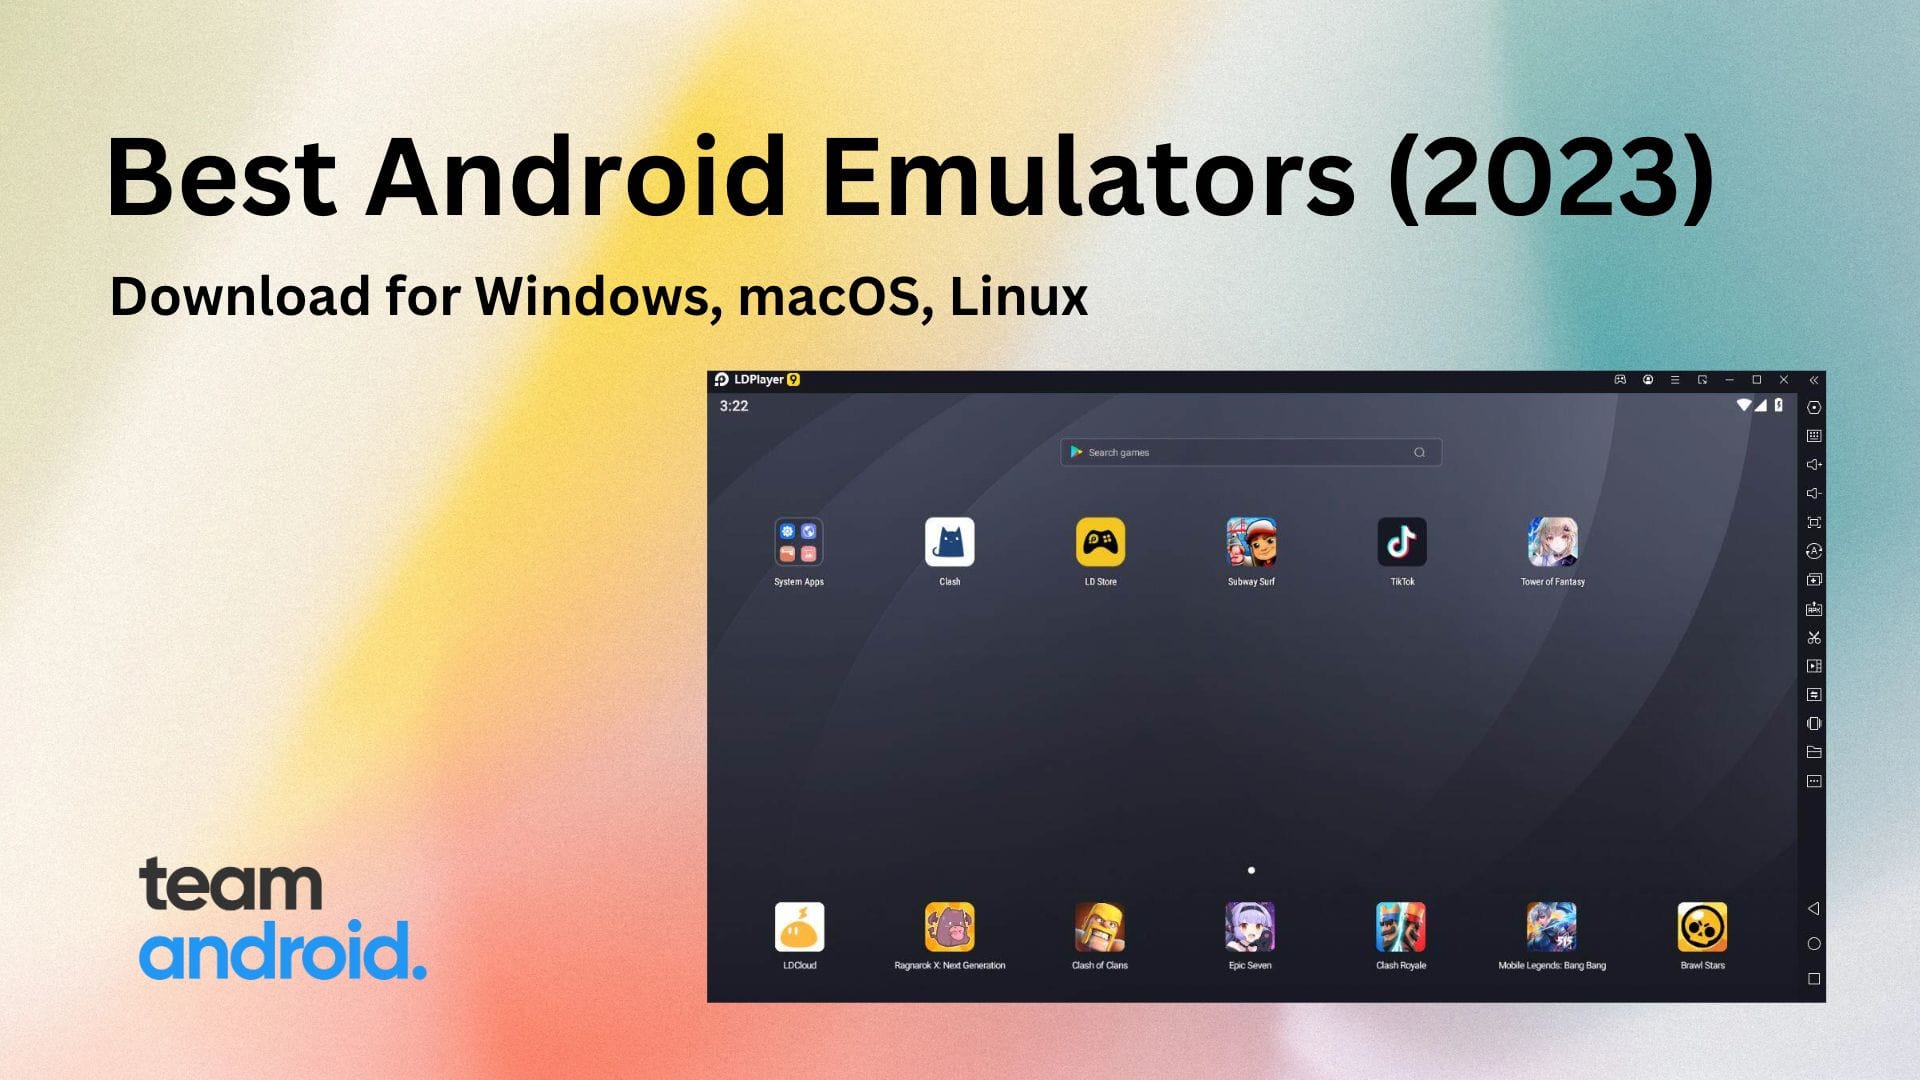 Best Android Emulators for Windows, Mac, Linux